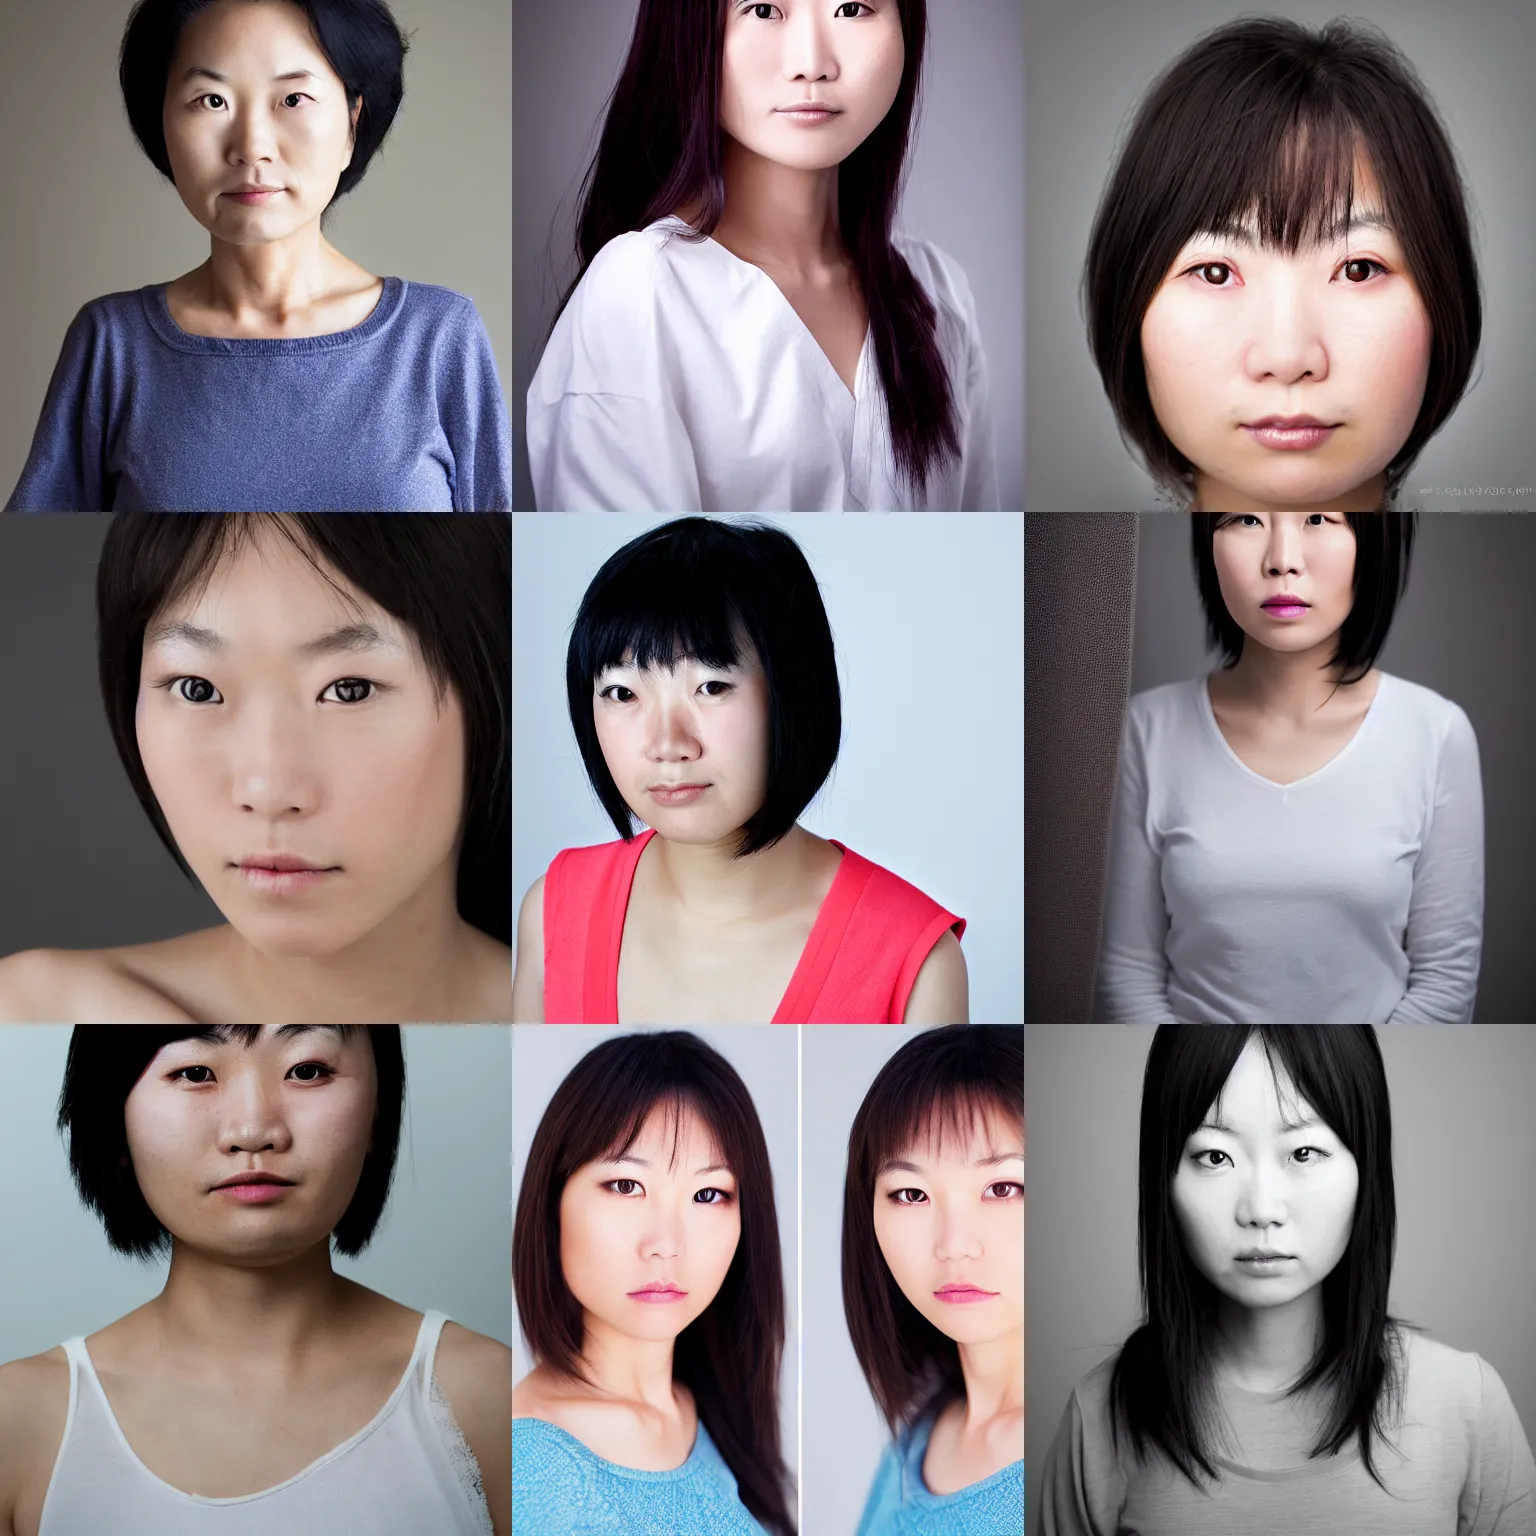 Prompt: front view studio portrait of a single half-japanese female, digital photography, soft lighting, no background